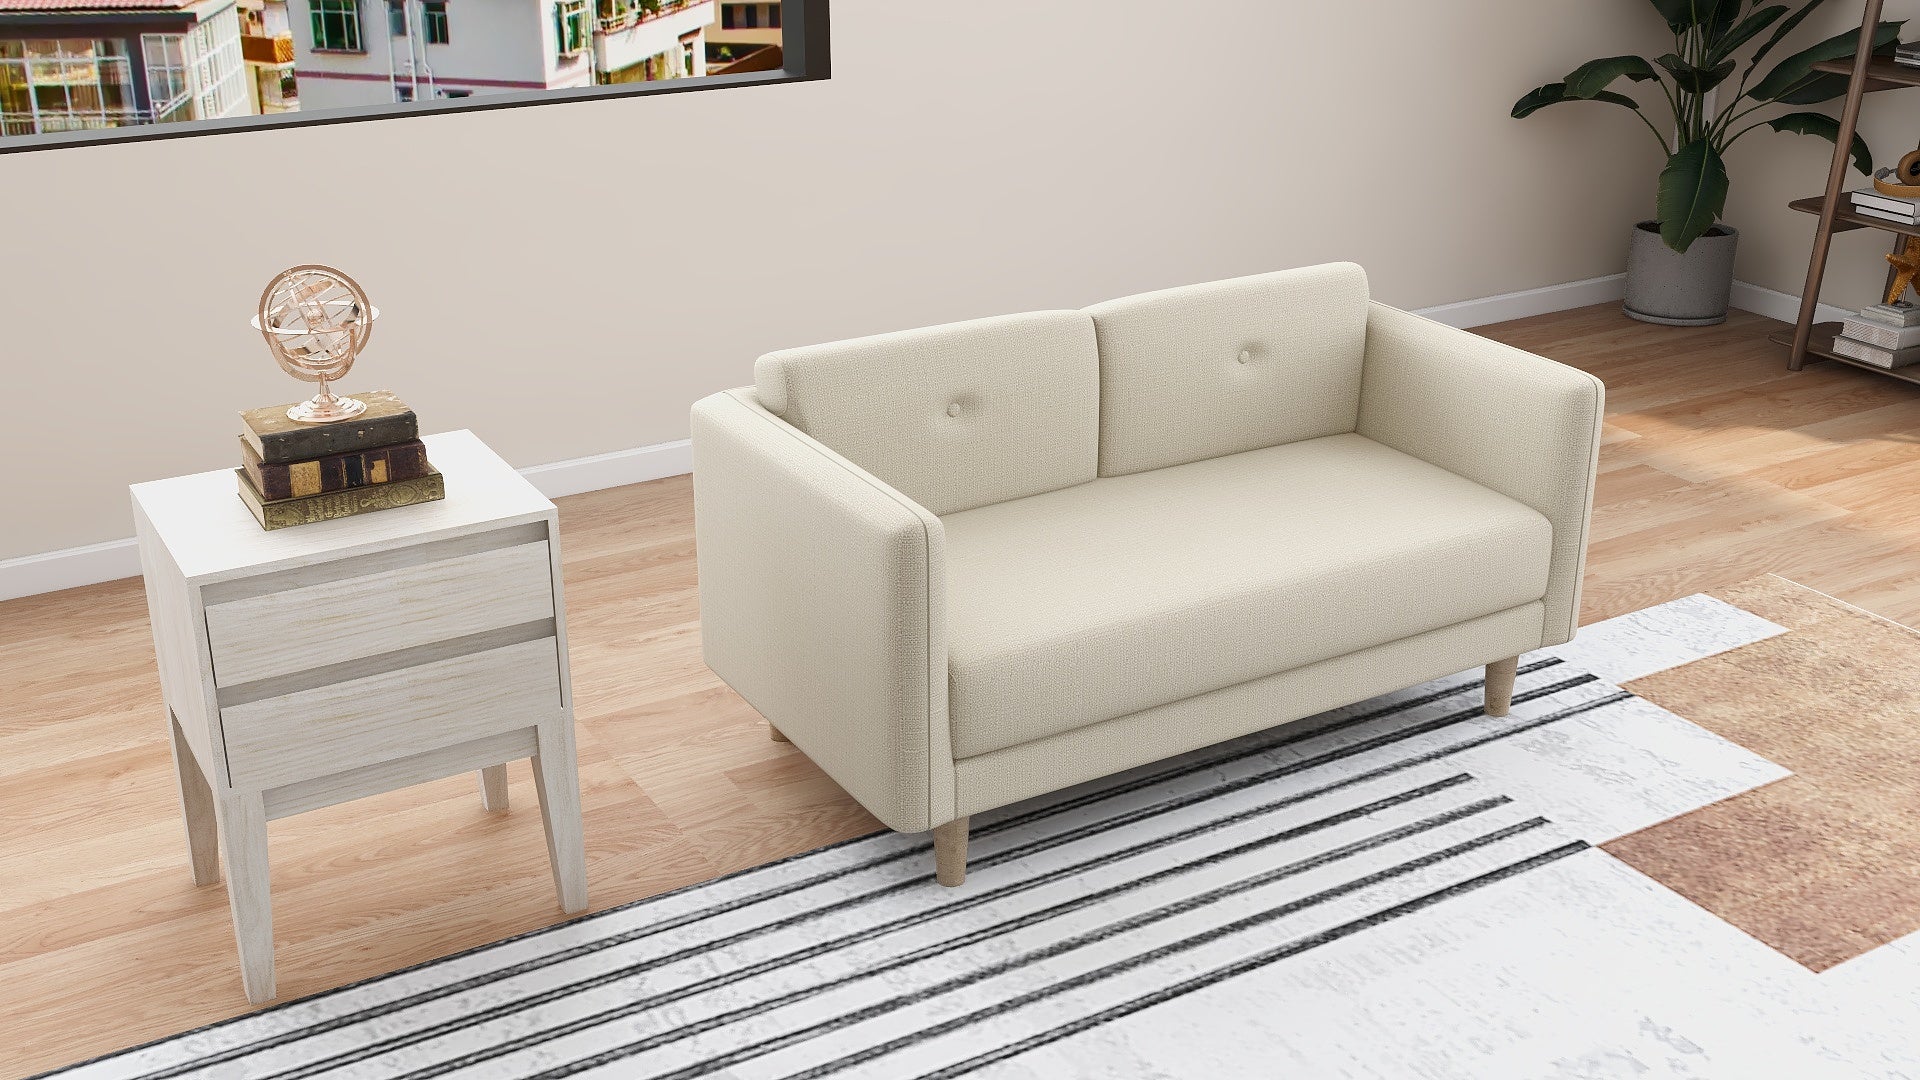 ASHER 2-Seater Fabric Sofa AF Home